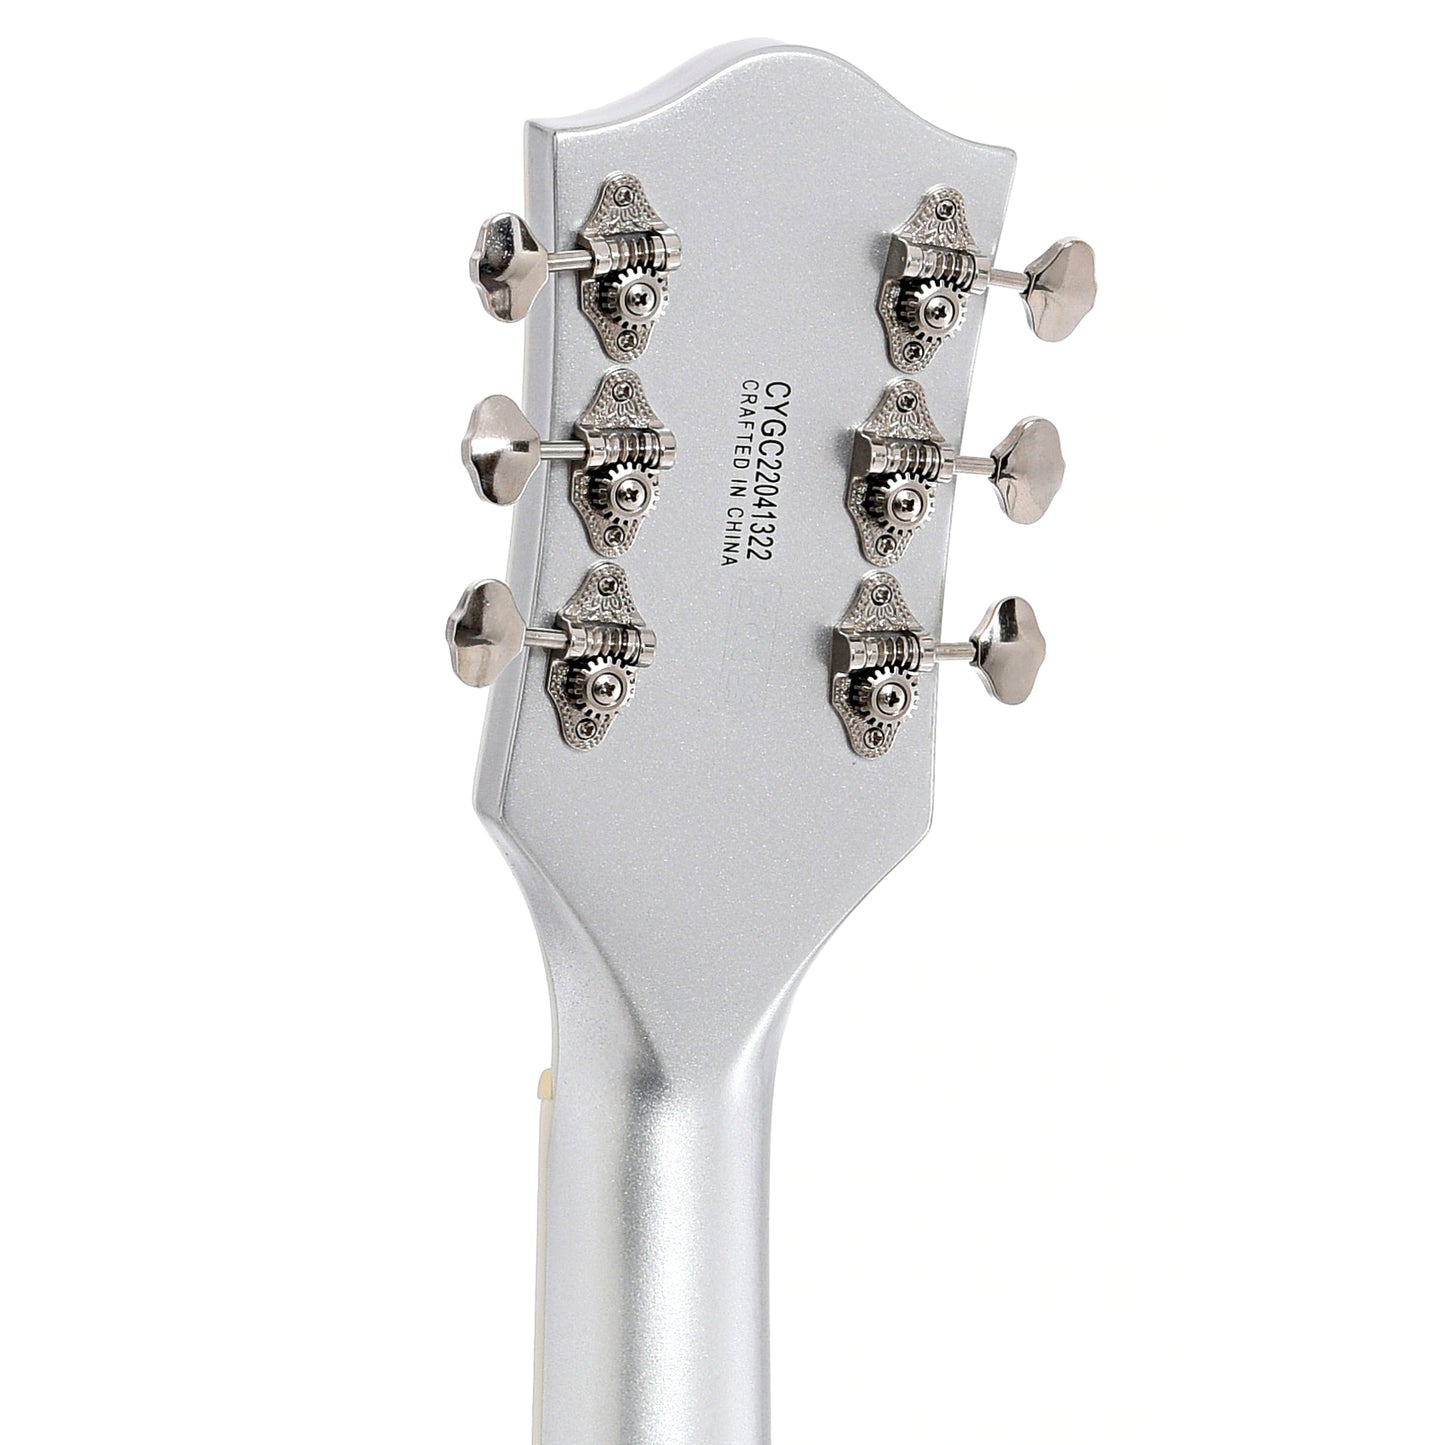 Gretsch G5420T Electromatic Classic Hollow Body Single Cut with Bigbsy, Airline Silver